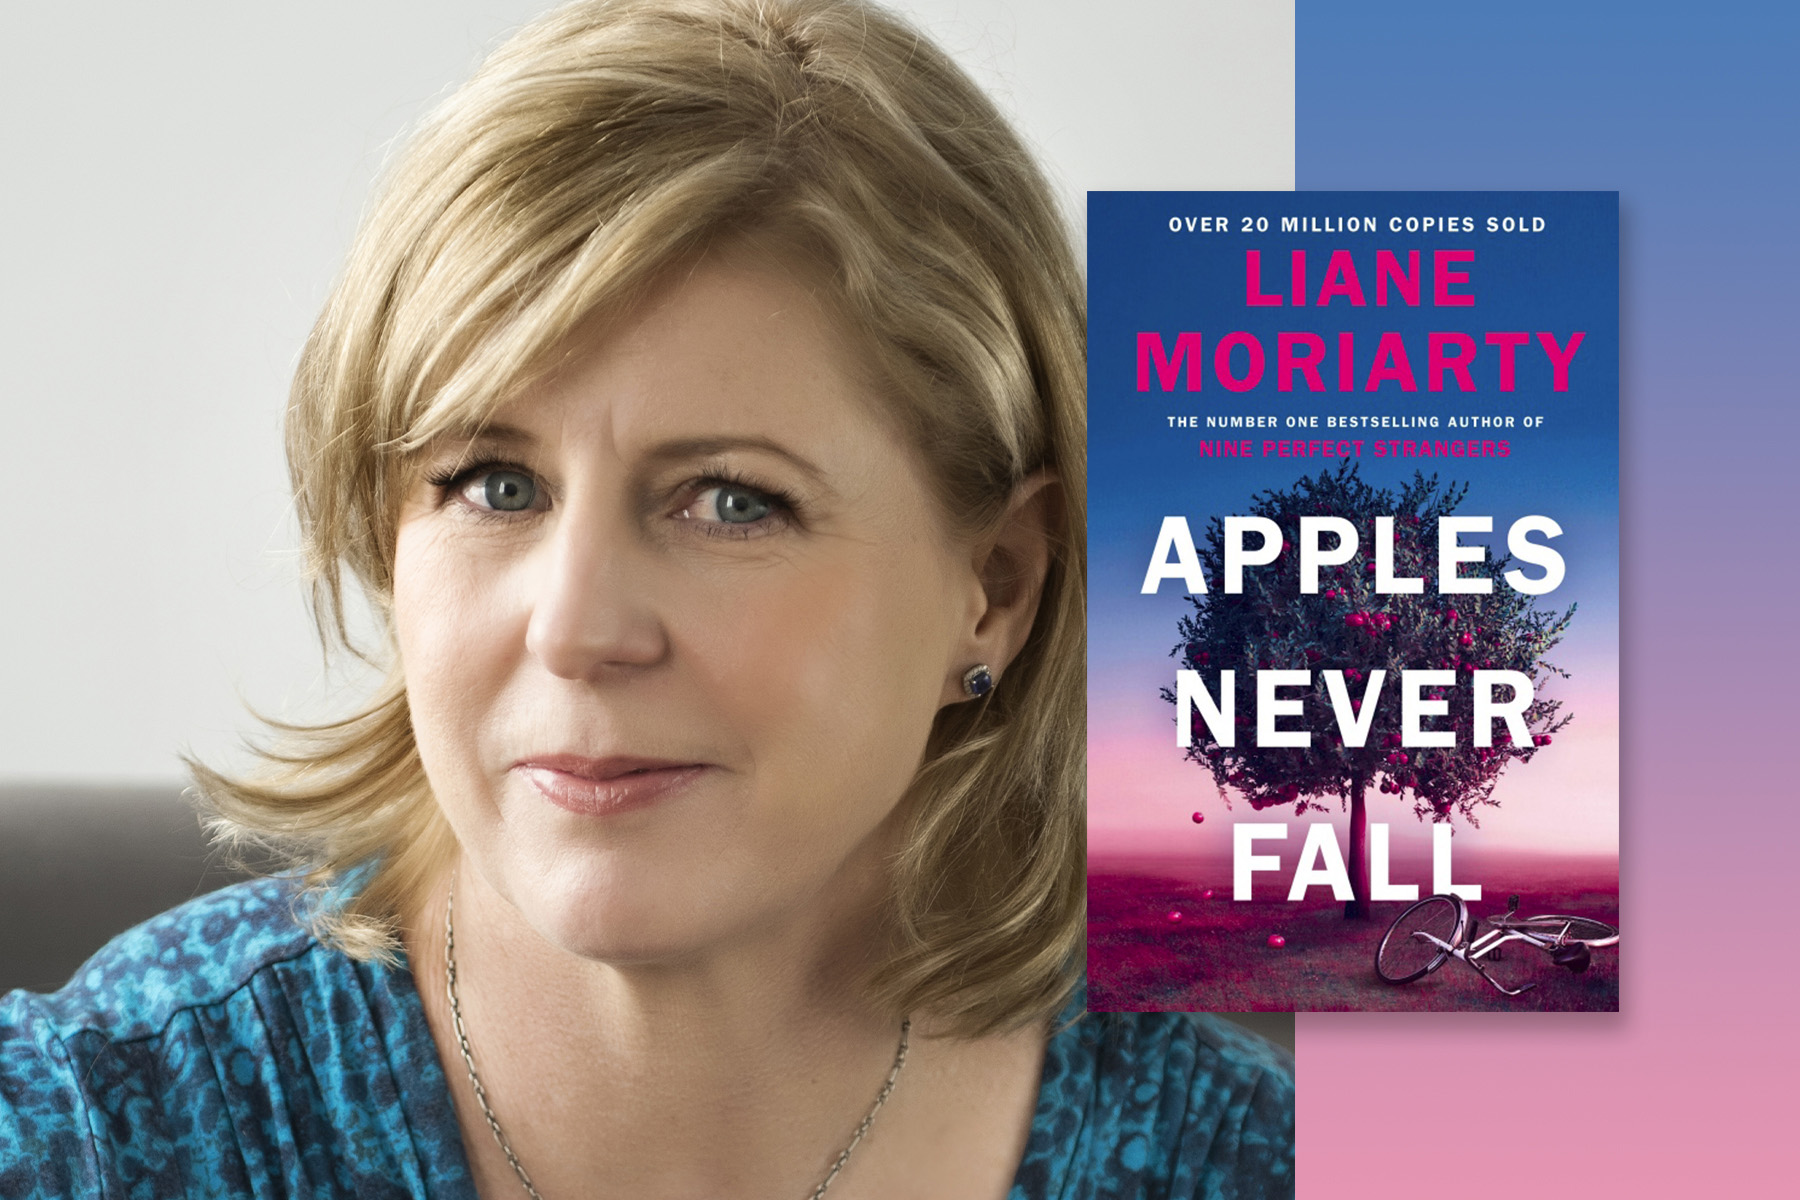 A photograph of Liane Moriarty next to the cover of Apples Never Fall